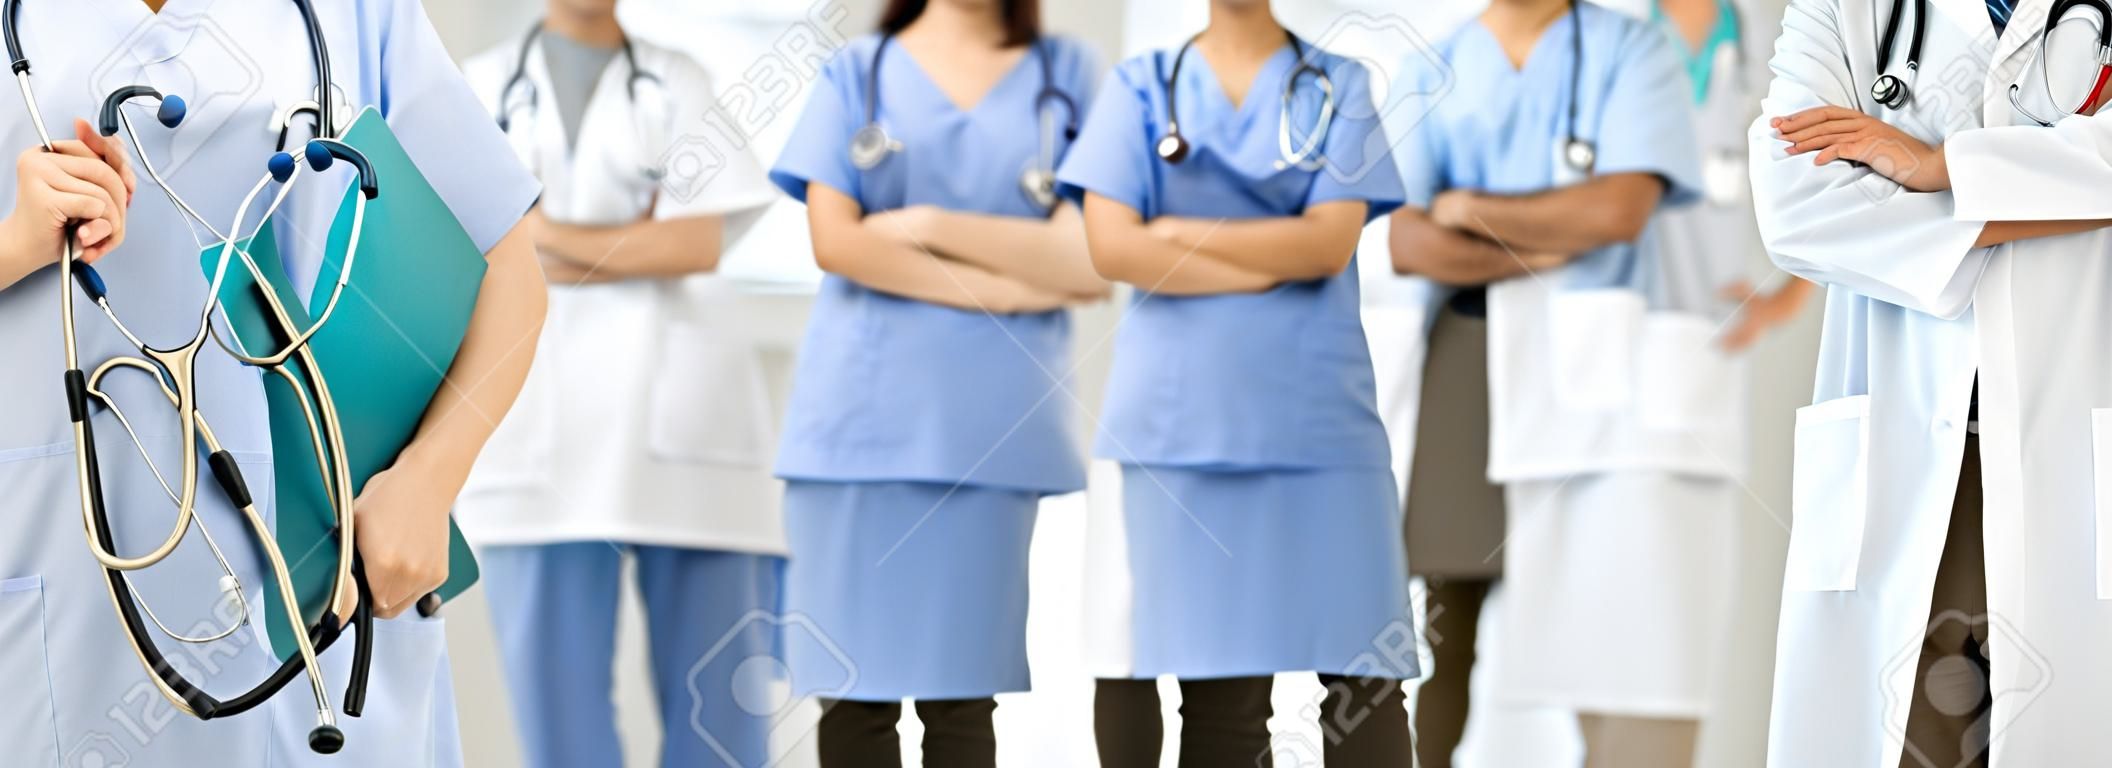 Healthcare people group. Professional doctor working in hospital office or clinic with other doctors, nurse and surgeon.